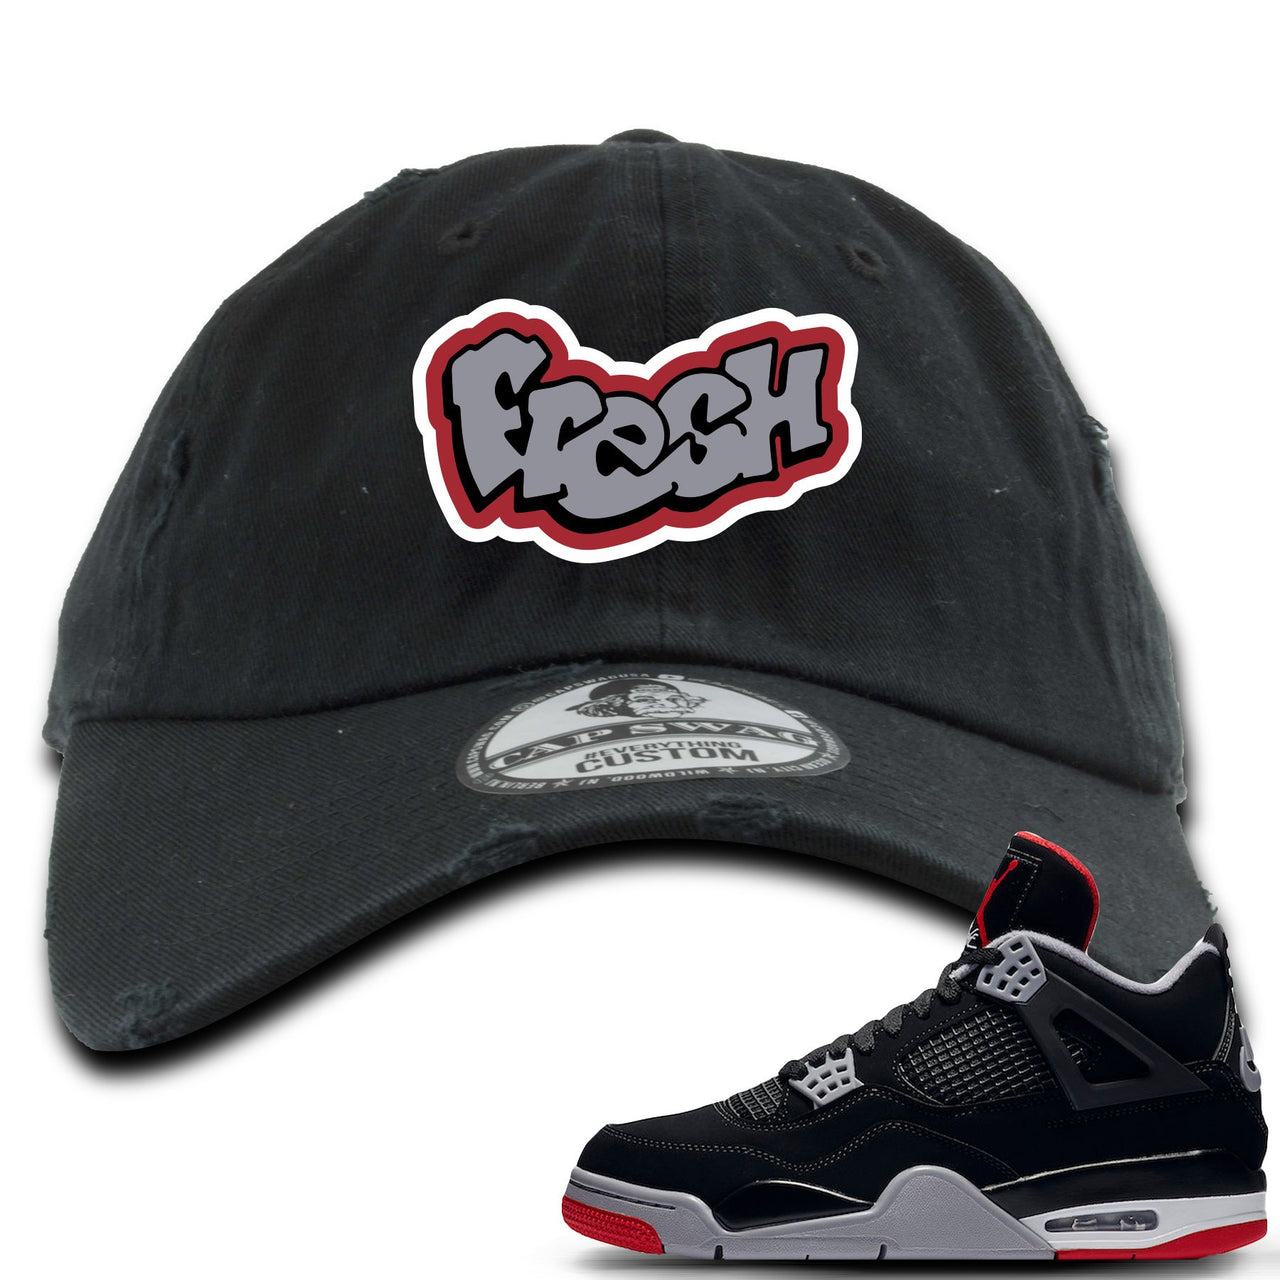 This black and grey dad hat will match great with you Air Jordan 4 Bred shoes